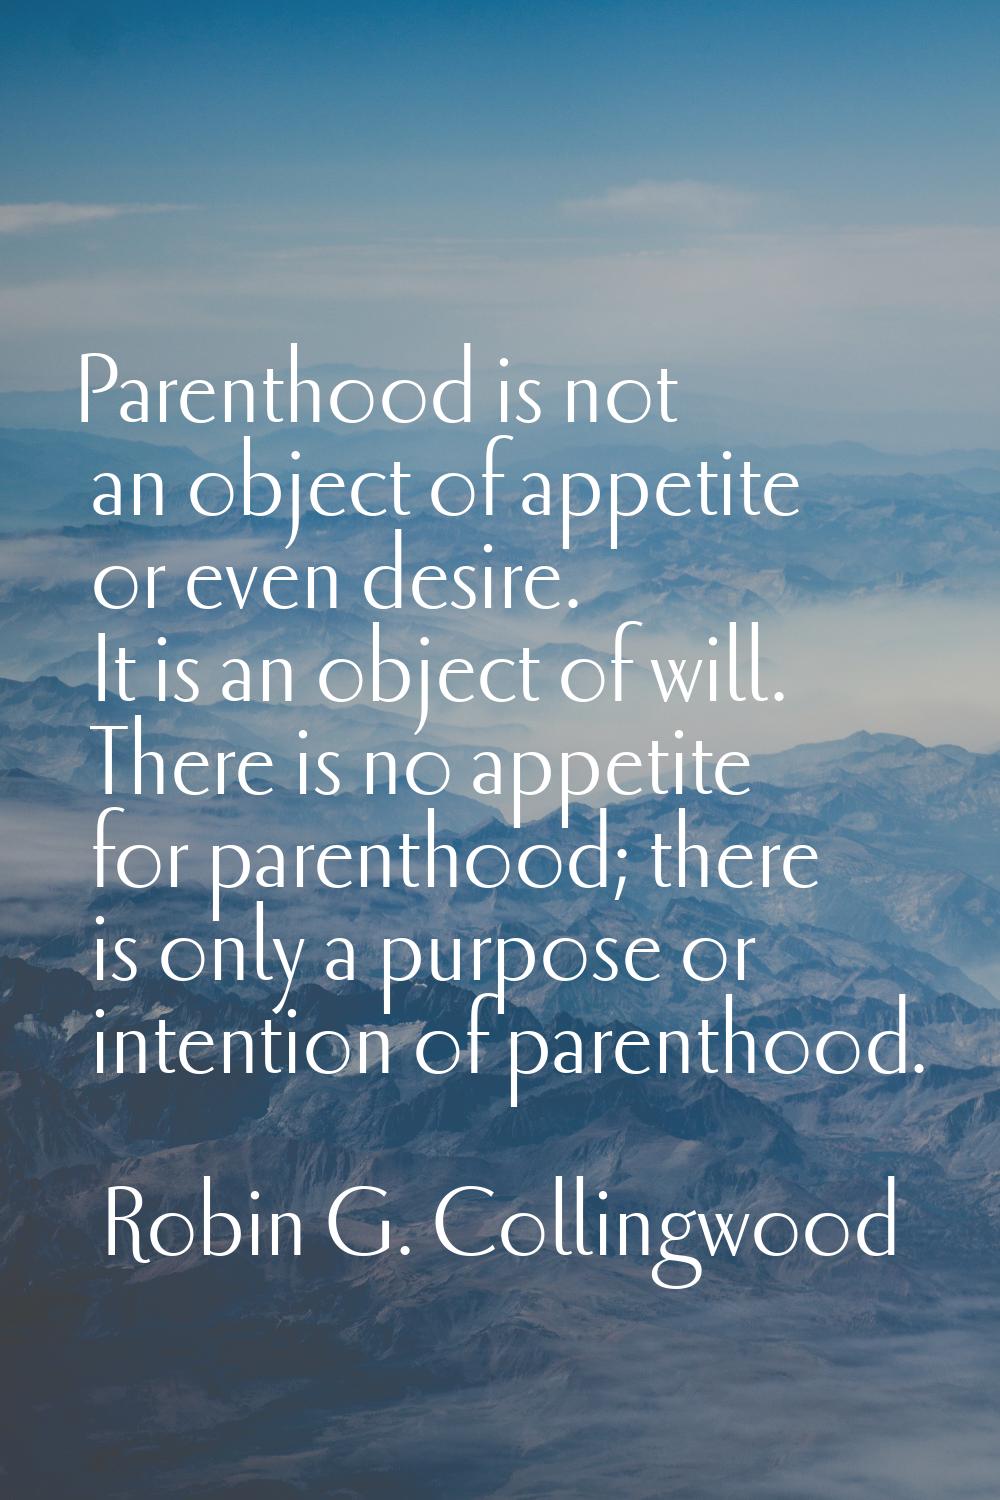 Parenthood is not an object of appetite or even desire. It is an object of will. There is no appeti